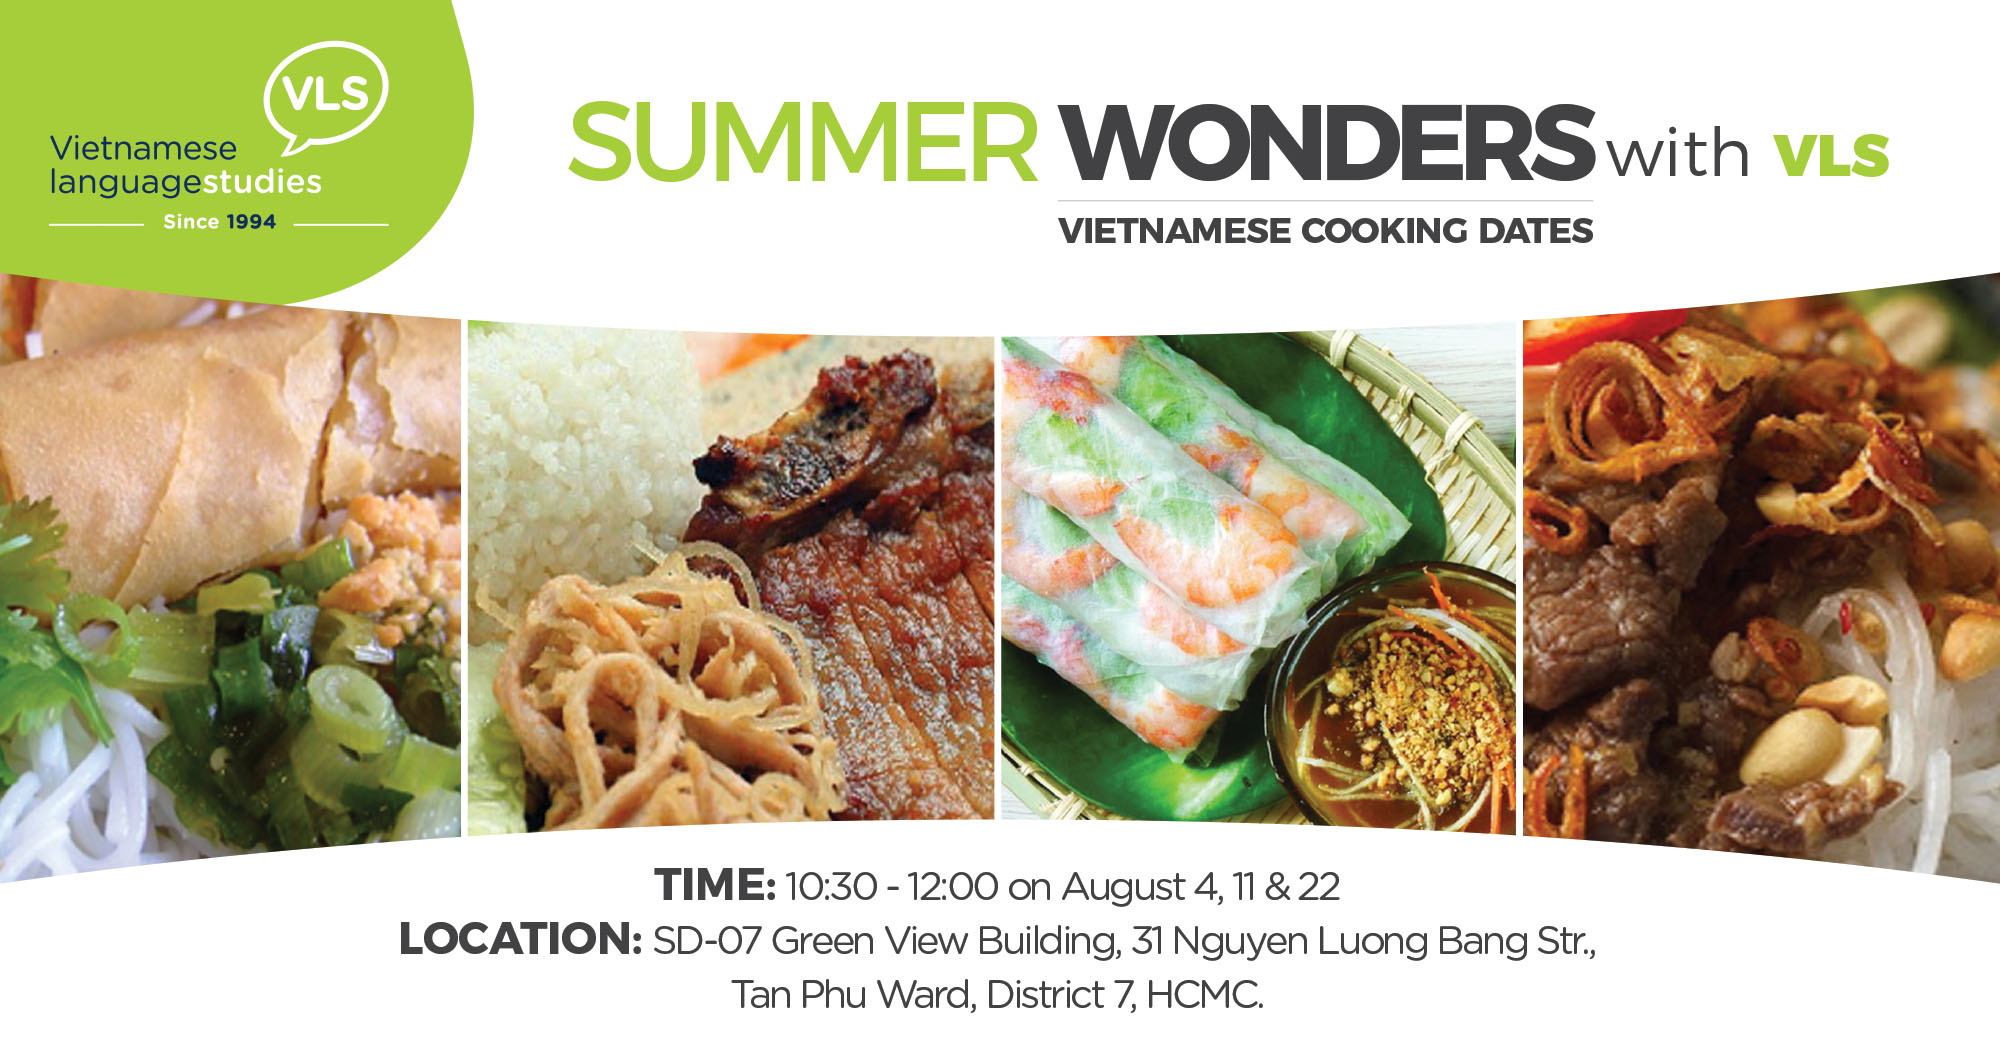 Learn Vietnamese language through learning how to cook Saigon food.